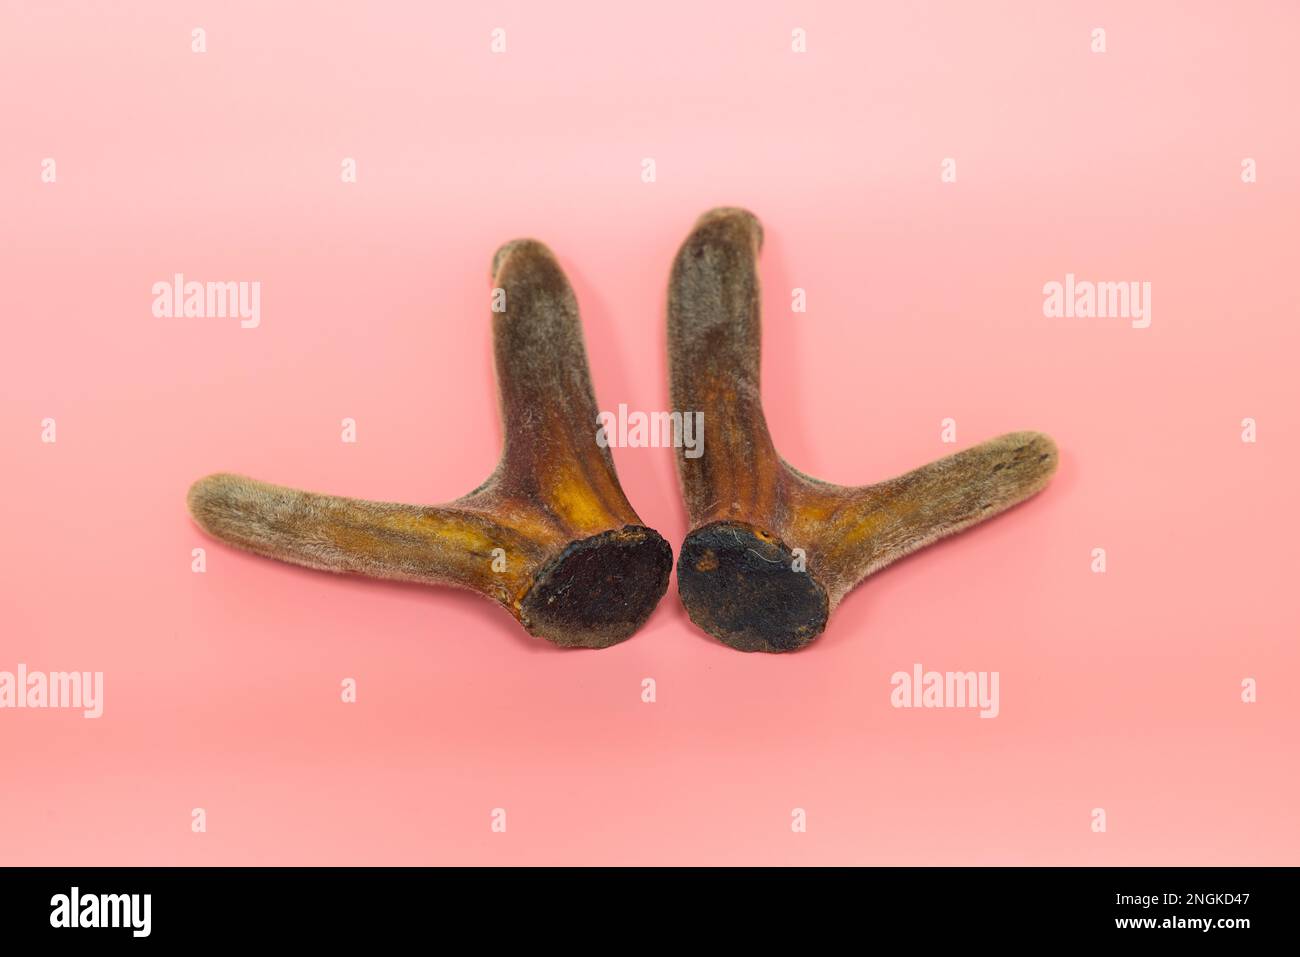 Velvet antler in pink background. cartilaginous antler in a precalcified growth stage of deer, covered in a hairy, velvet-like skin, sold in China as Stock Photo